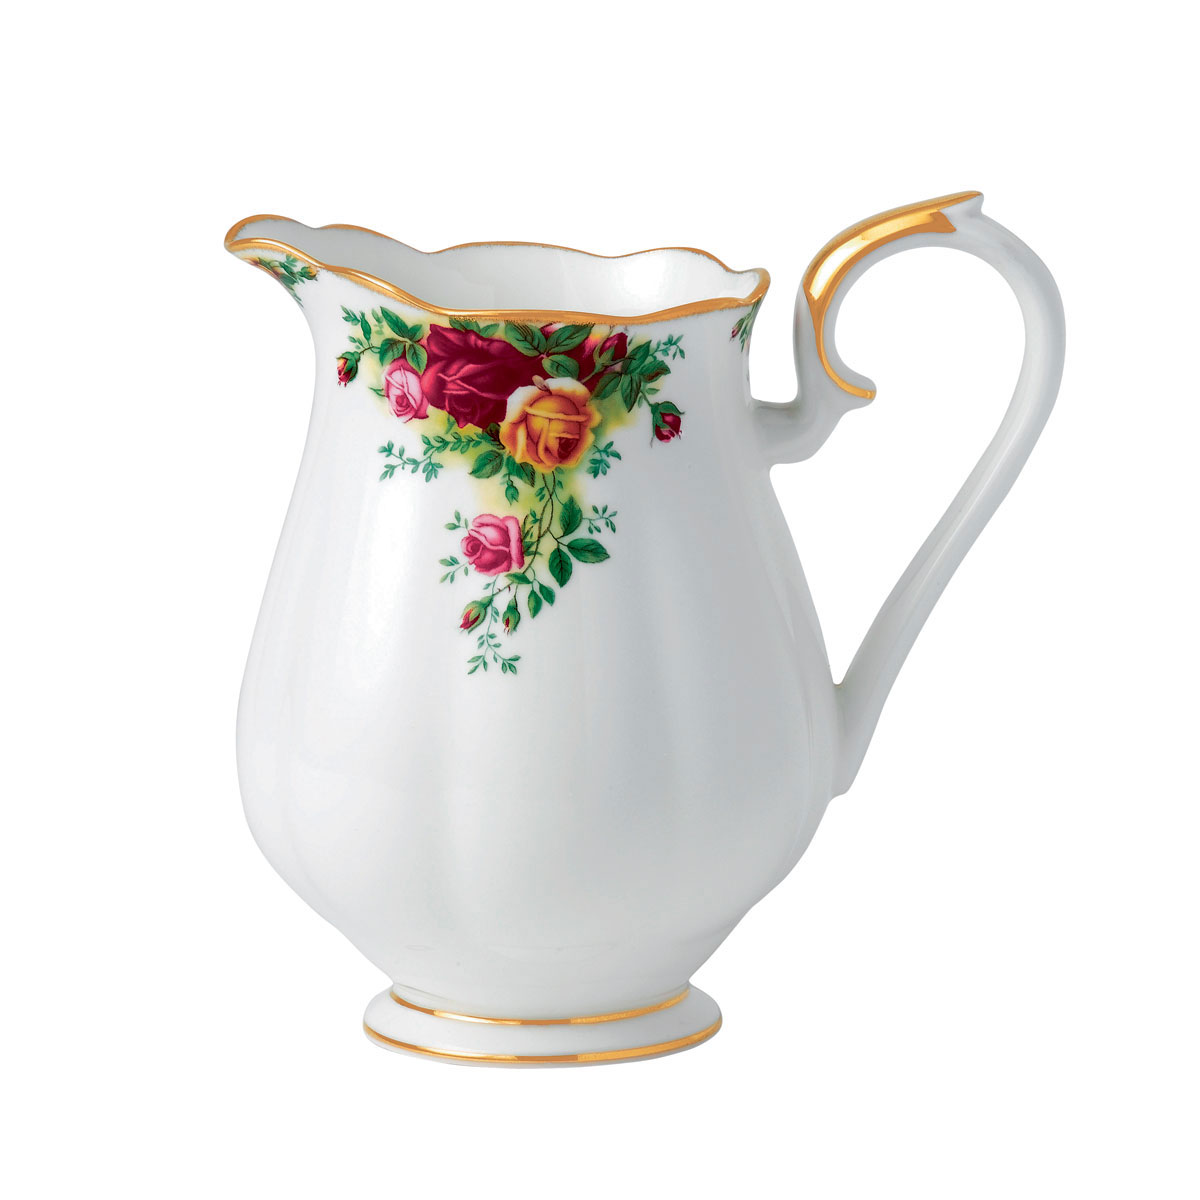 Royal Albert Old Country Roses Pitcher